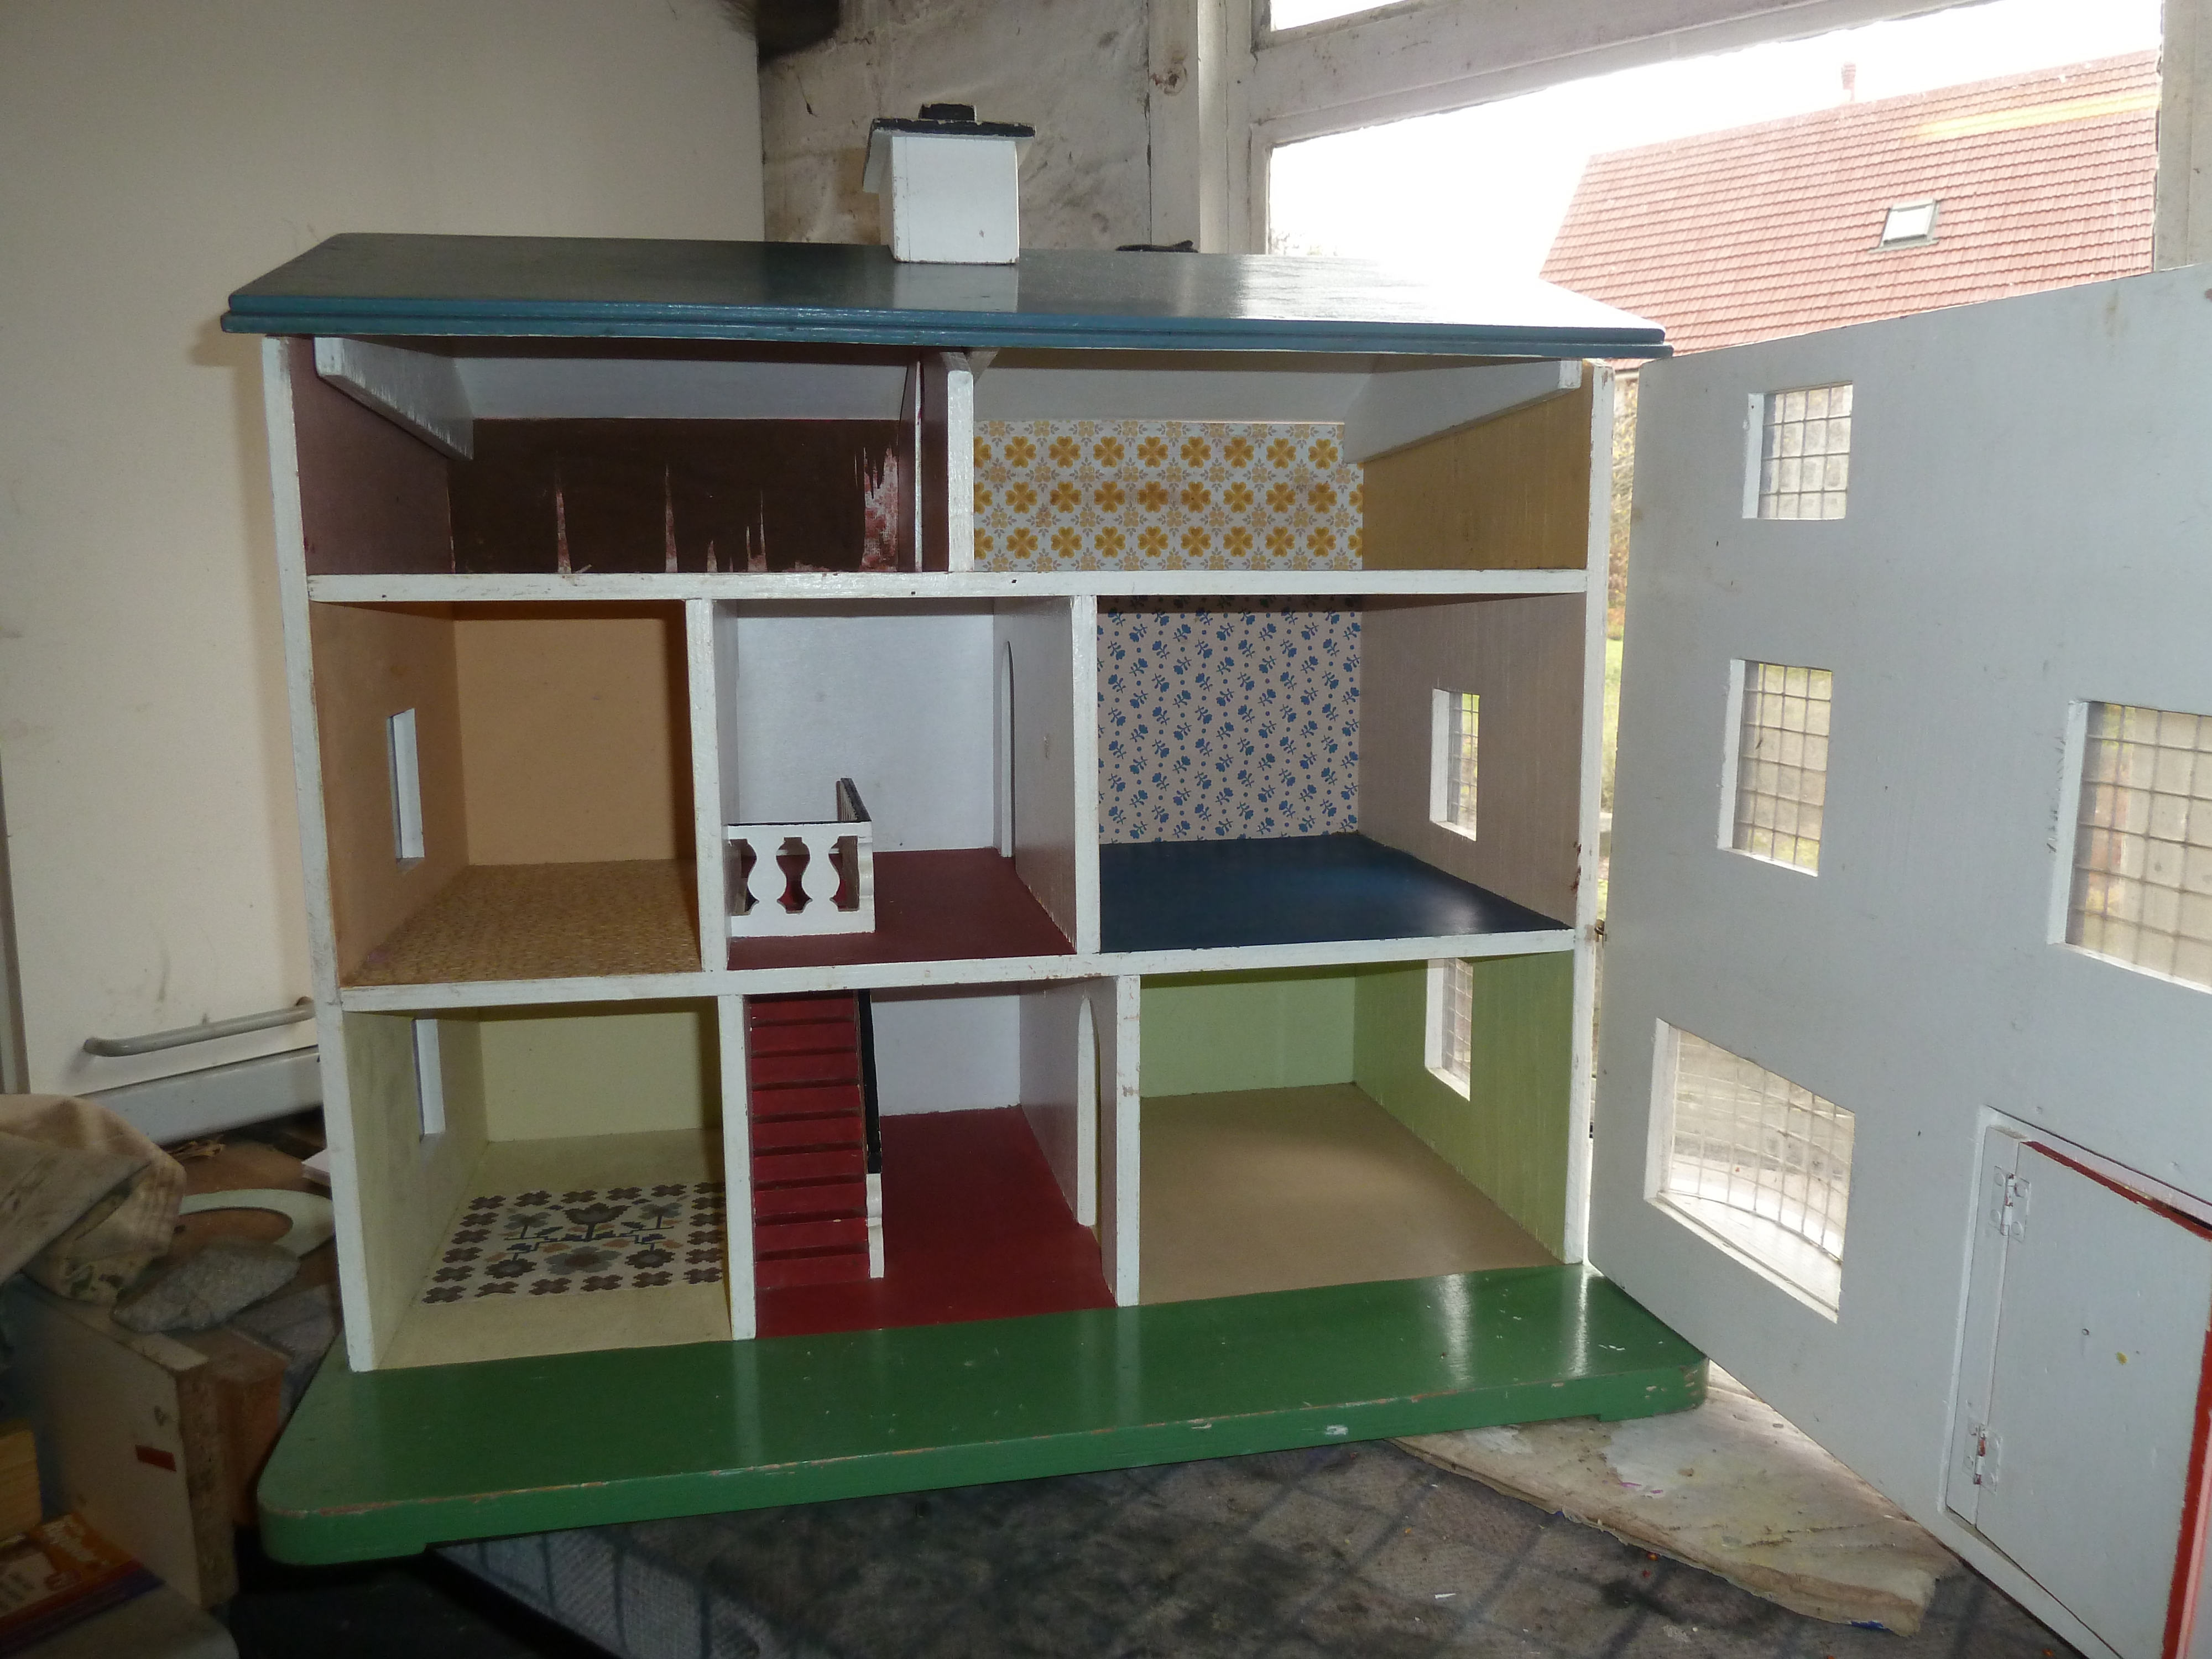 decorating a dolls house